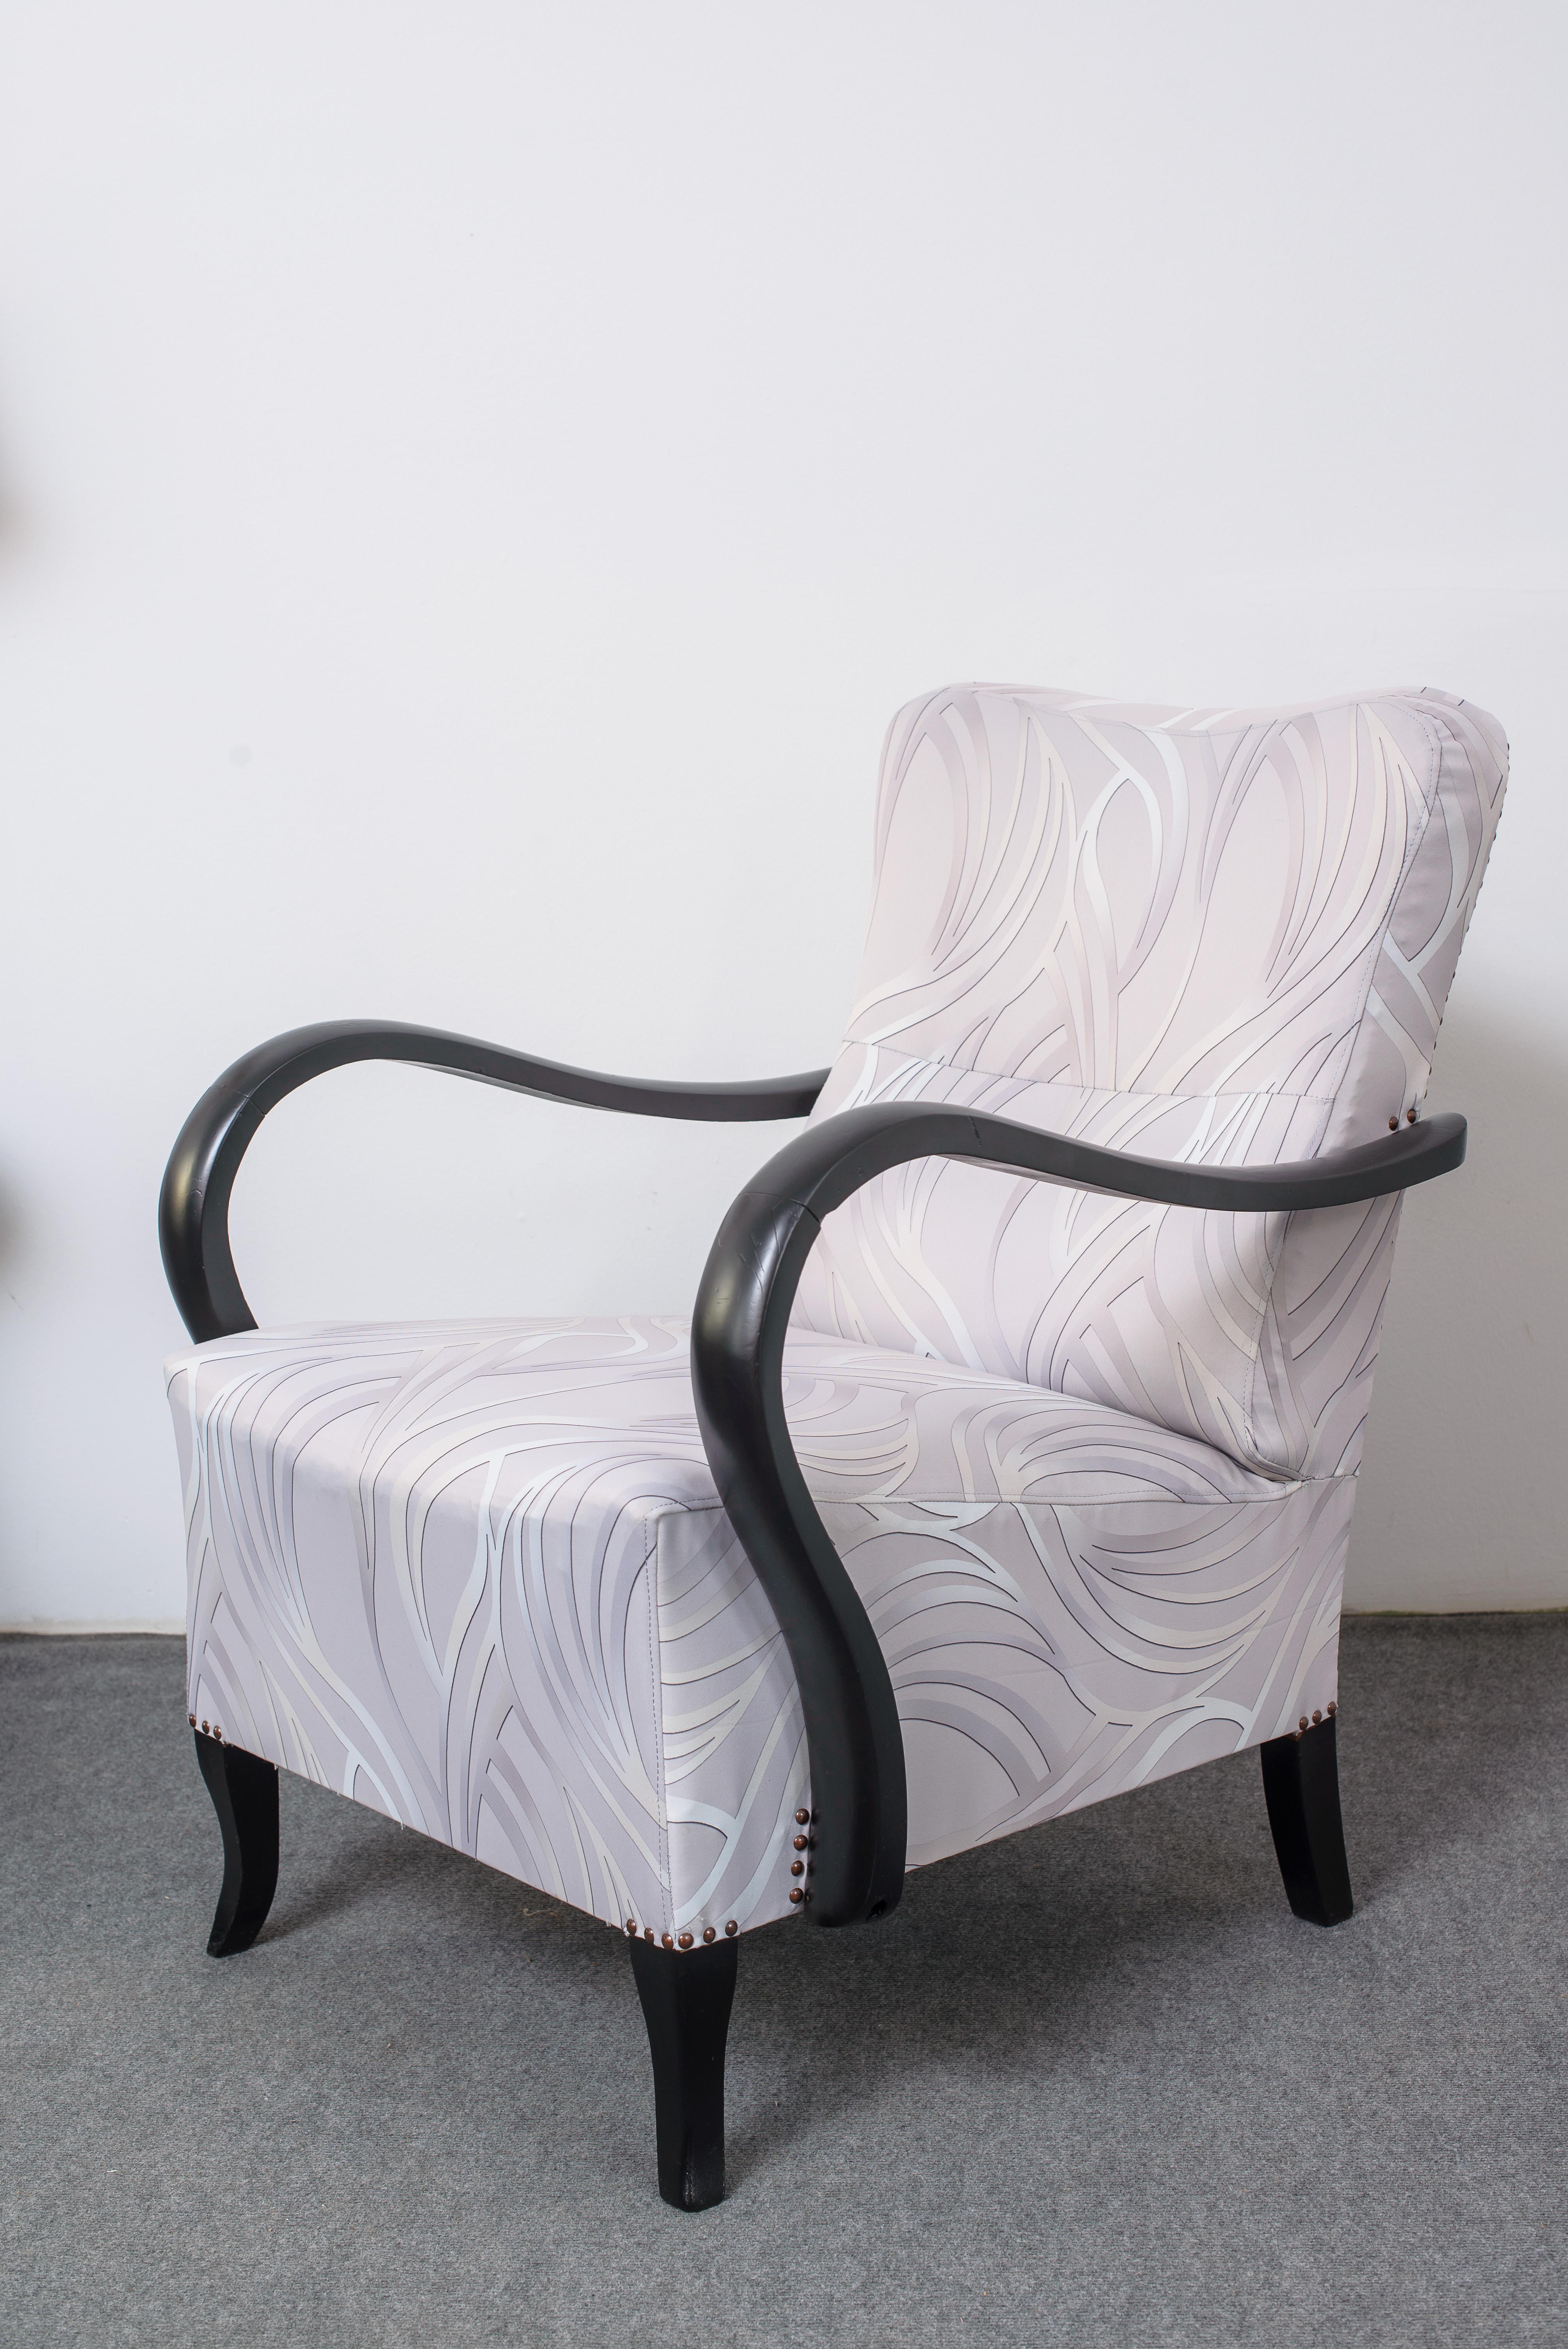 Art Deco armchair, circa 1920s.
Restored and re-upholstered.
Lacquered, hand colored.
They are period 1920s-1930s art deco chairs, they are not reproduction or 'in the style of', these are the real thing!